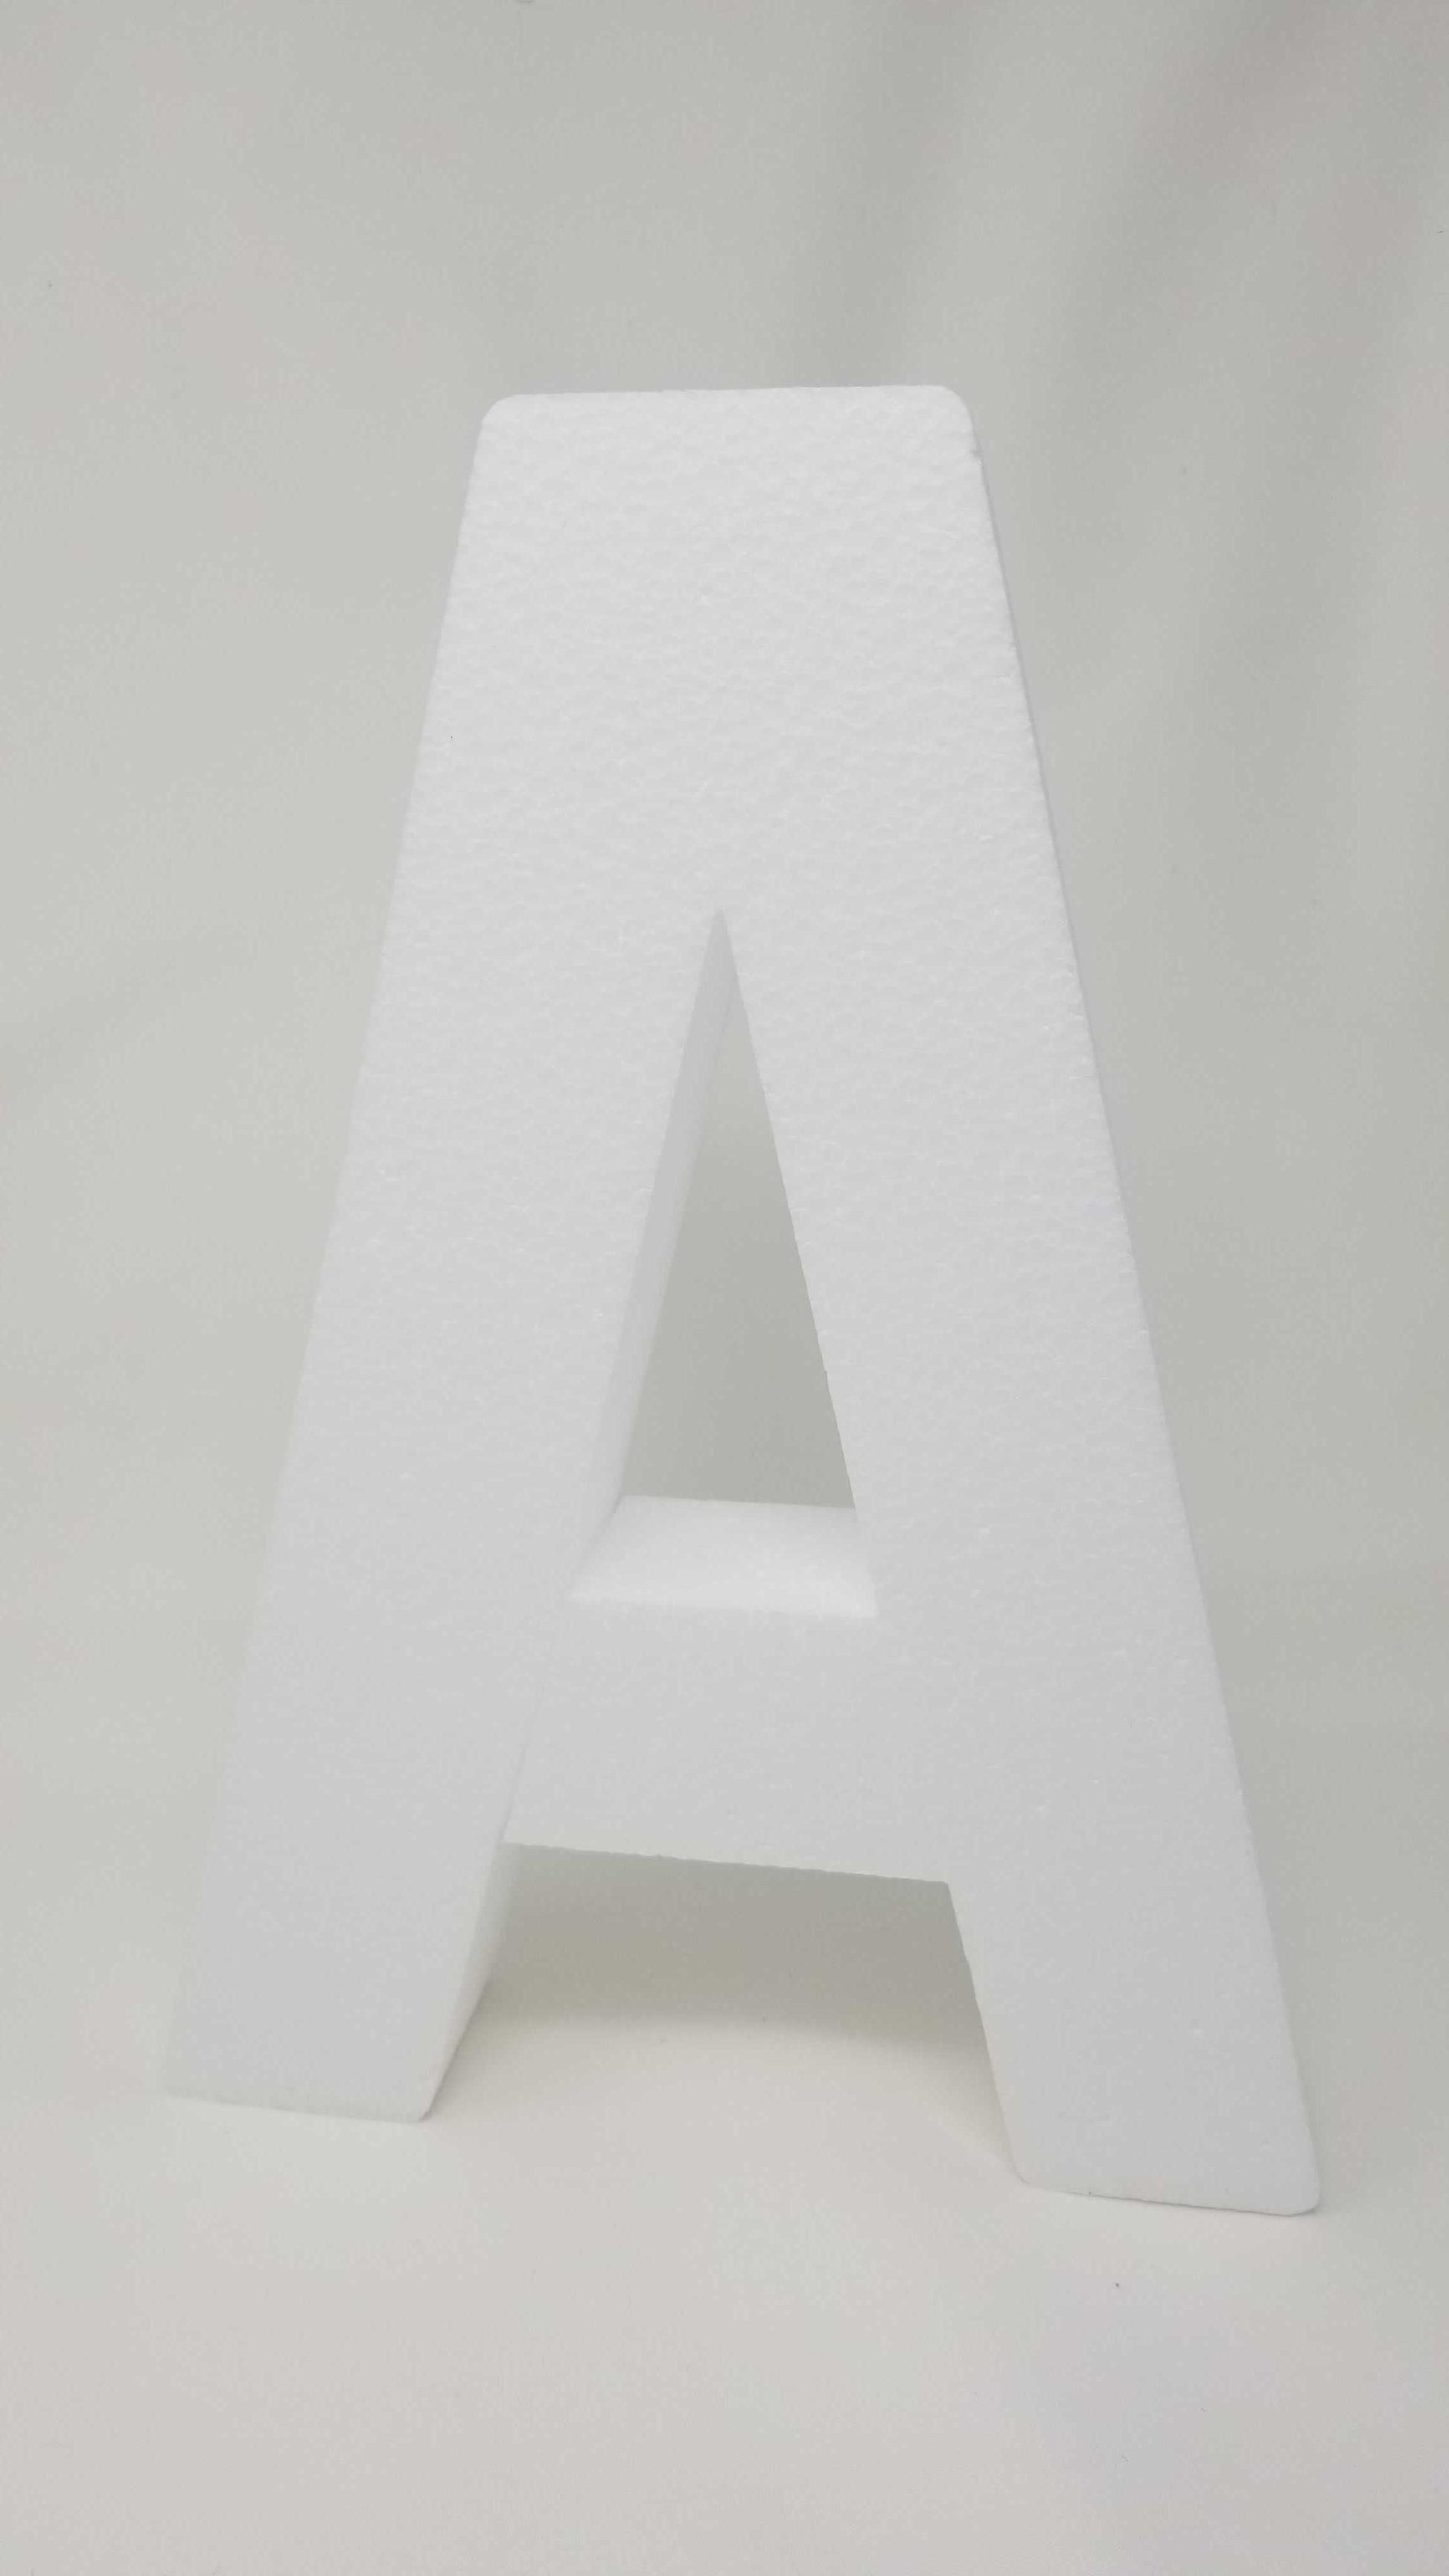 White Wood Letters 3 Inch, Wood Letters for DIY, Party Projects (R